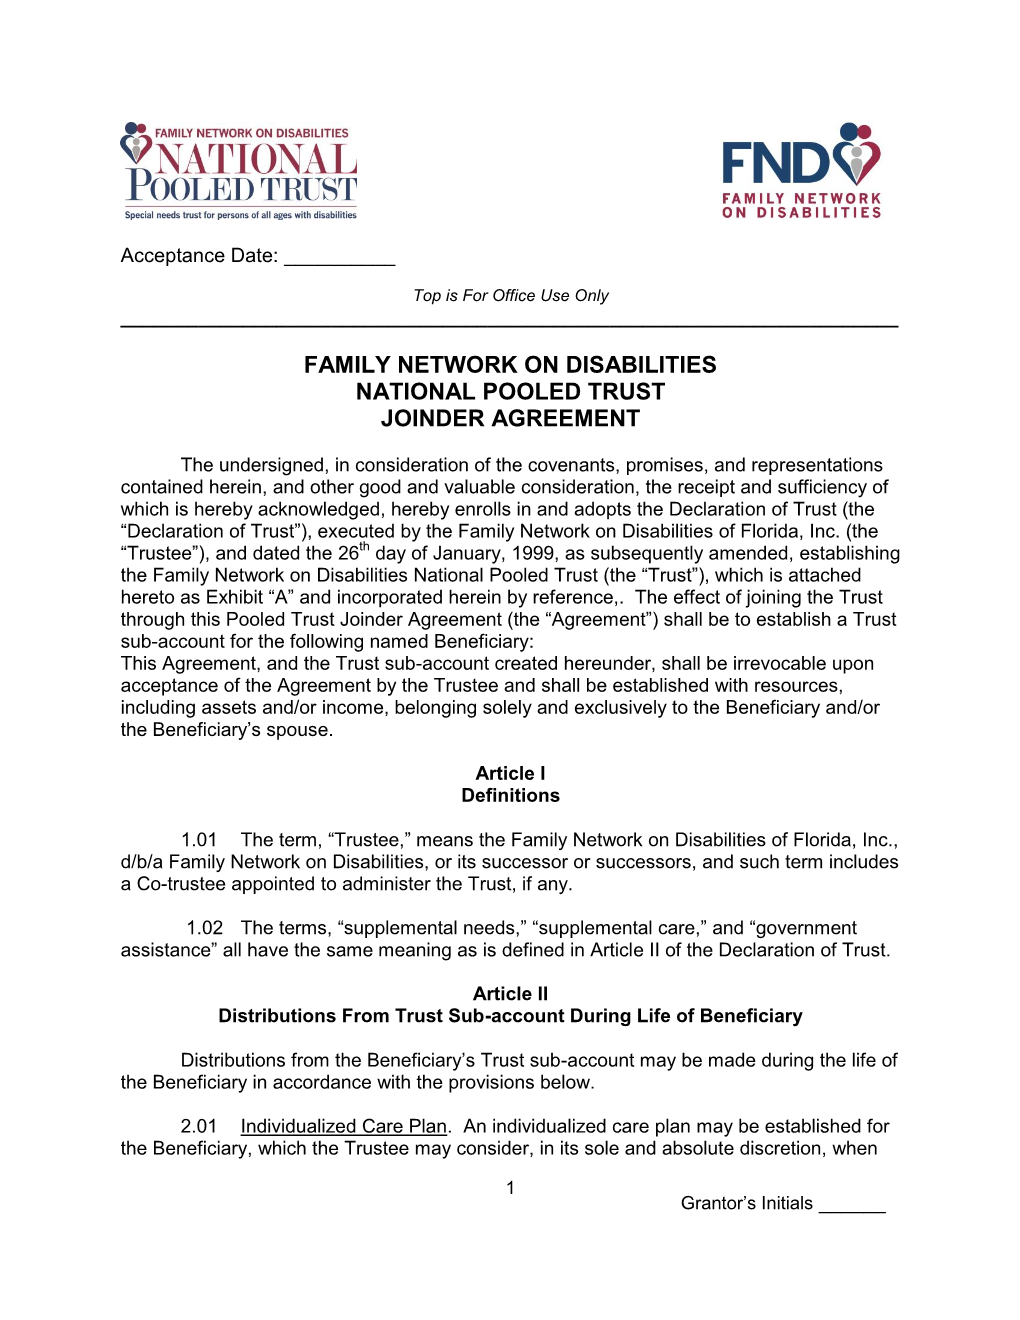 Family Network on Disabilities National Pooled Trust Joinder Agreement